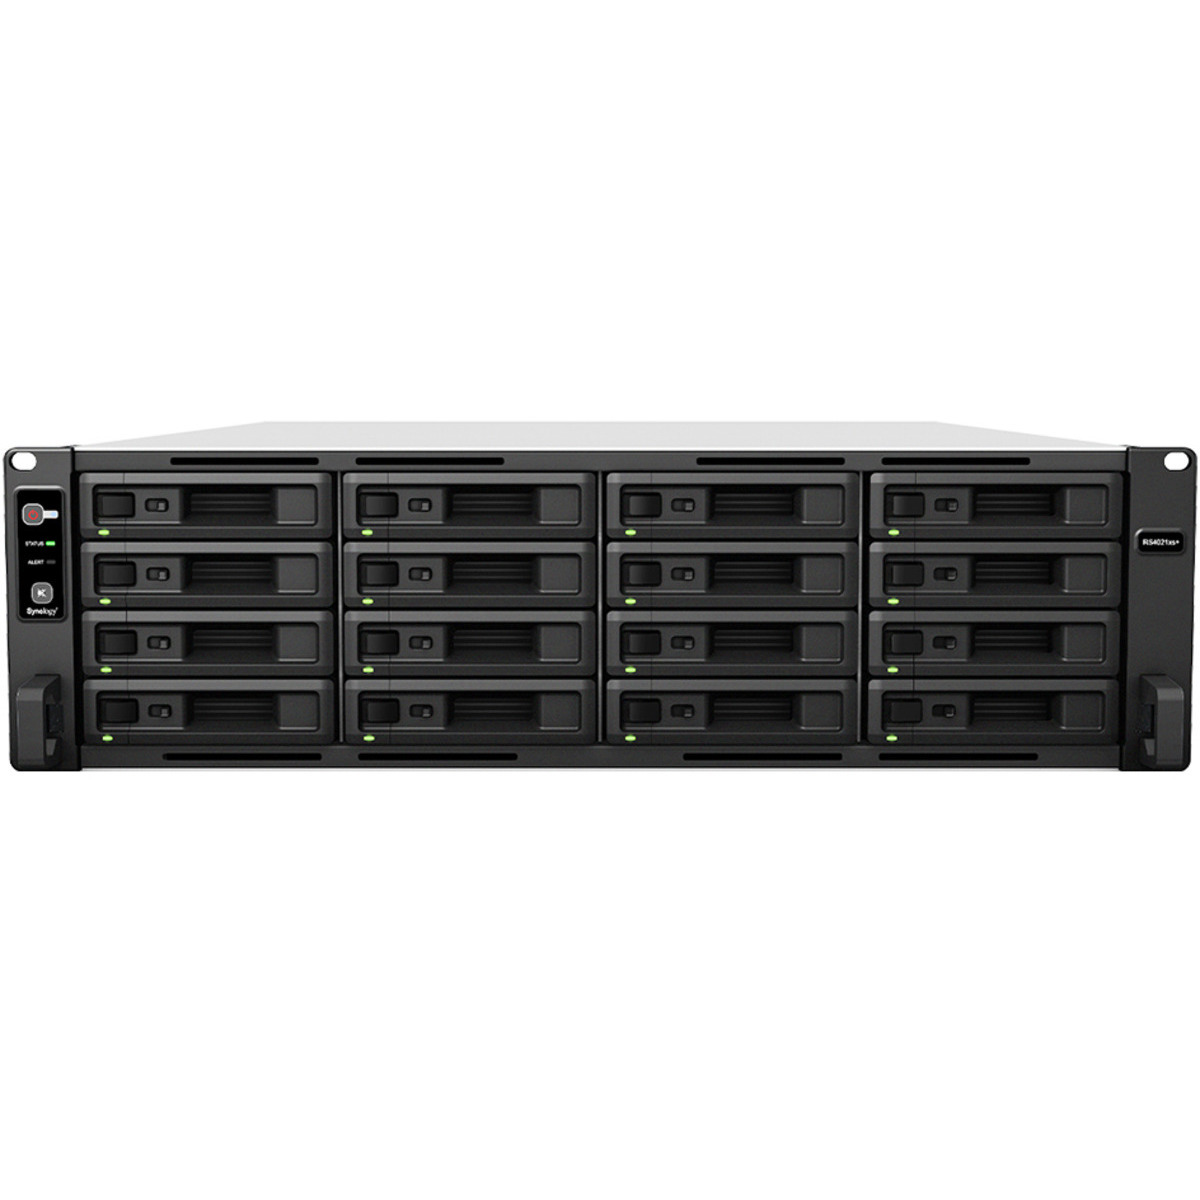 Synology RackStation RS4021xs+ 240tb 16-Bay RackMount Large Business / Enterprise NAS - Network Attached Storage Device 15x16tb Toshiba Enterprise Capacity MG08ACA16TE 3.5 7200rpm SATA 6Gb/s HDD ENTERPRISE Class Drives Installed - Burn-In Tested RackStation RS4021xs+